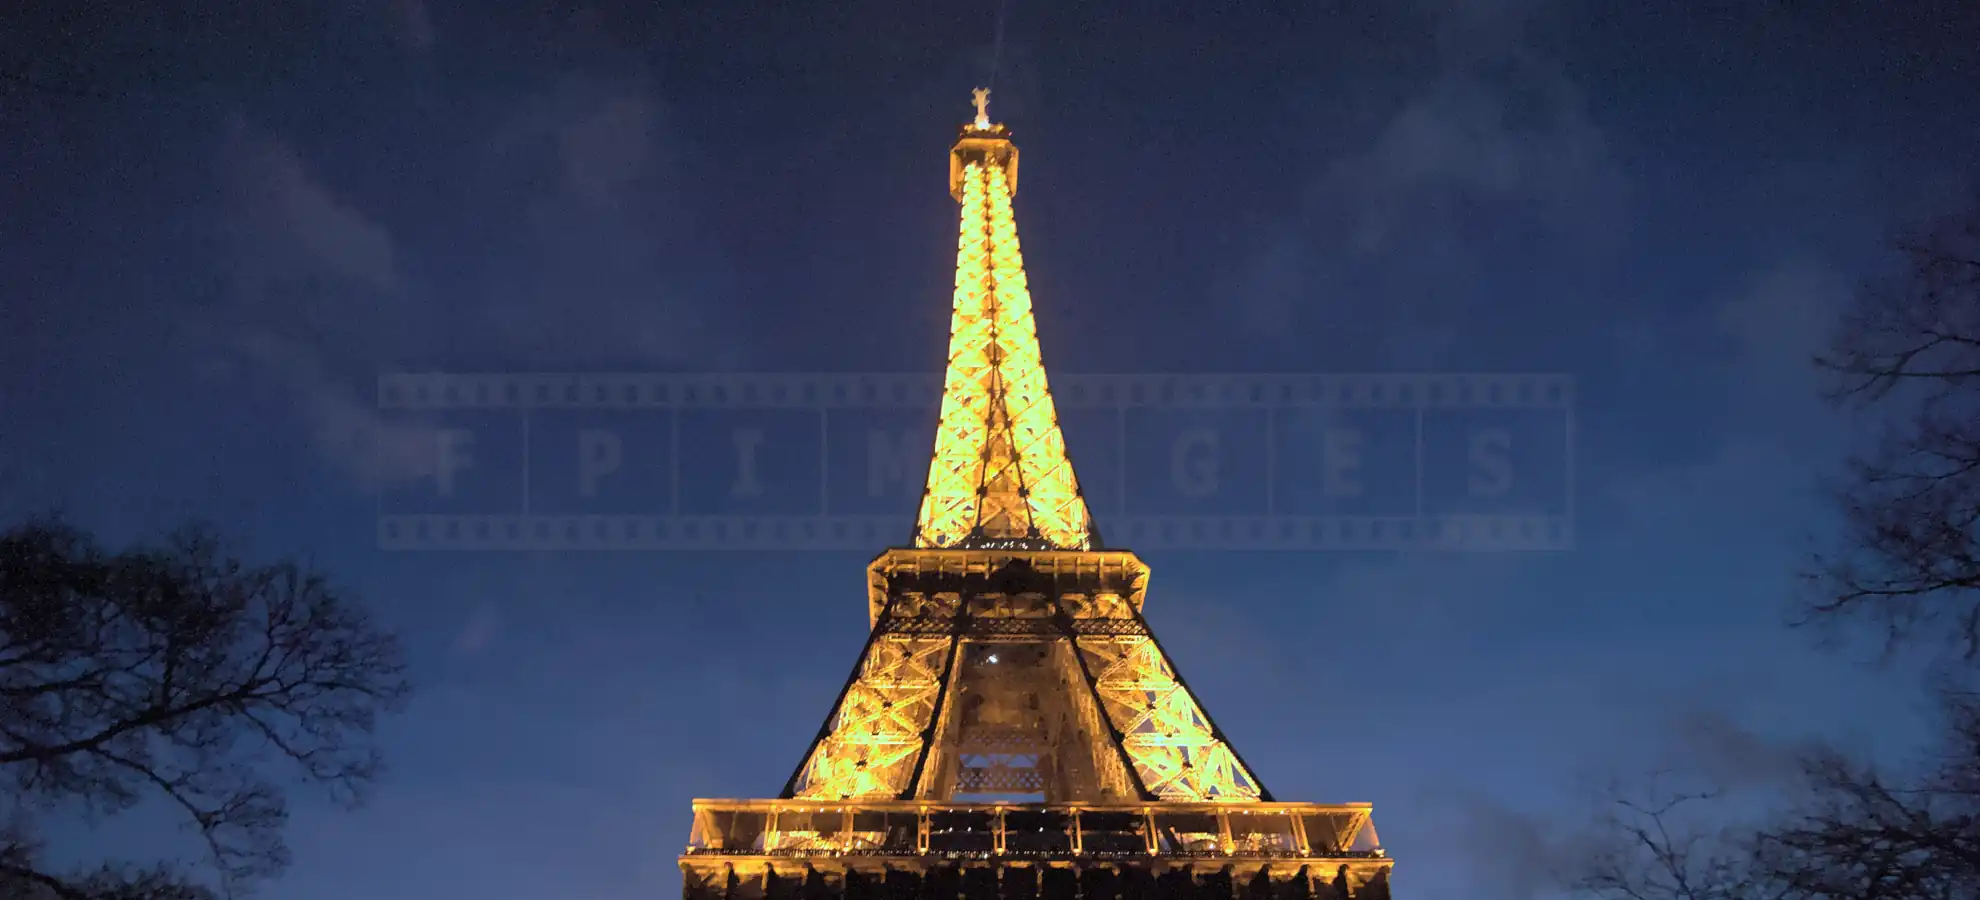 beautiful eifel tower with lights at dusk